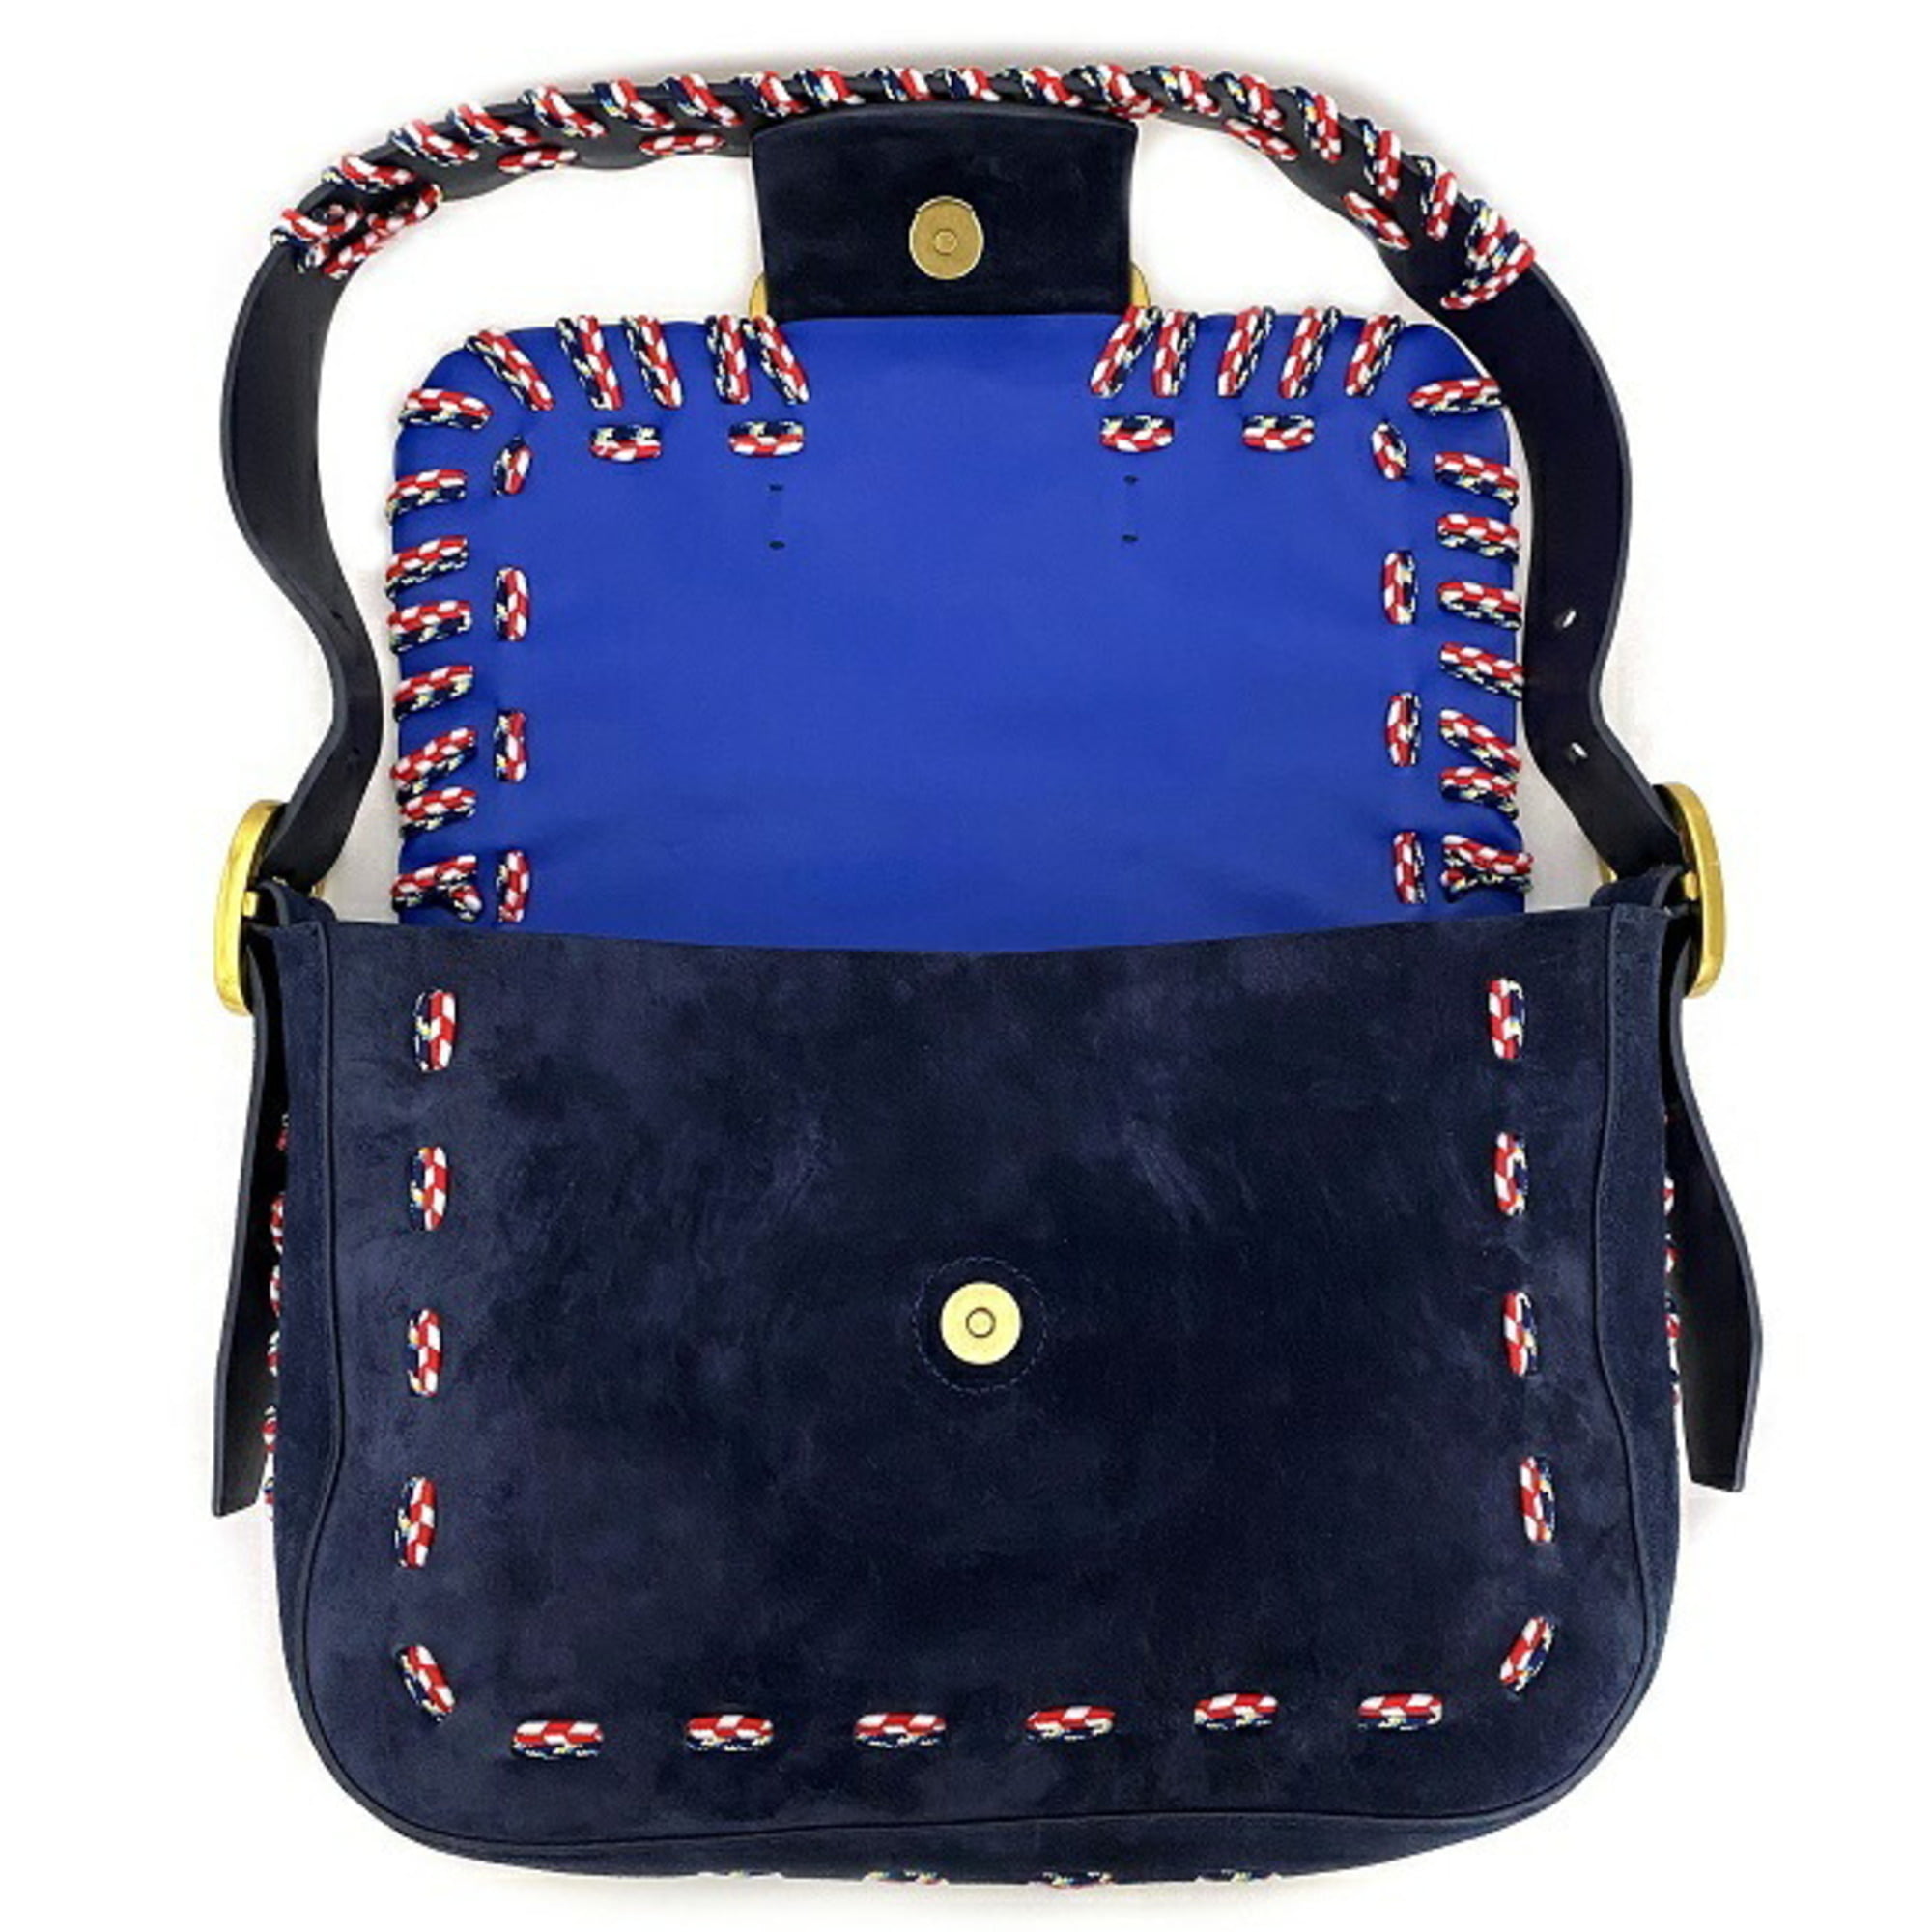 Authenticated Used Tory Burch One Shoulder Bag Navy Multicolor 10005608  01-17 Flap Leather Suede TORY BURCH Ladies 